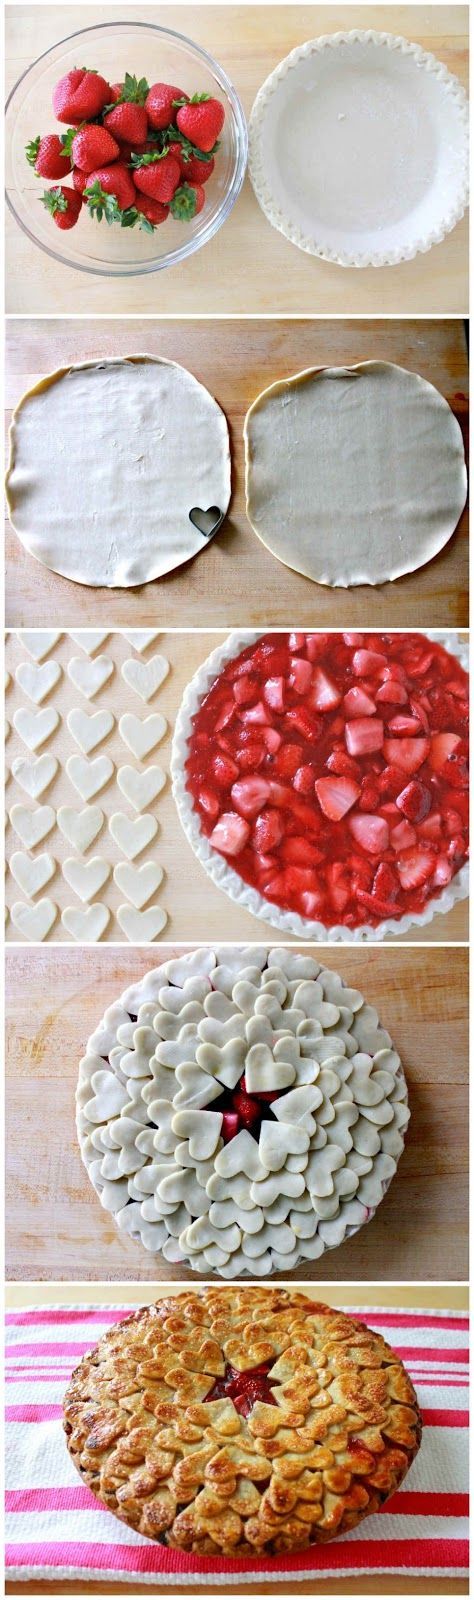 Totally making this for a valentines day party next year ..